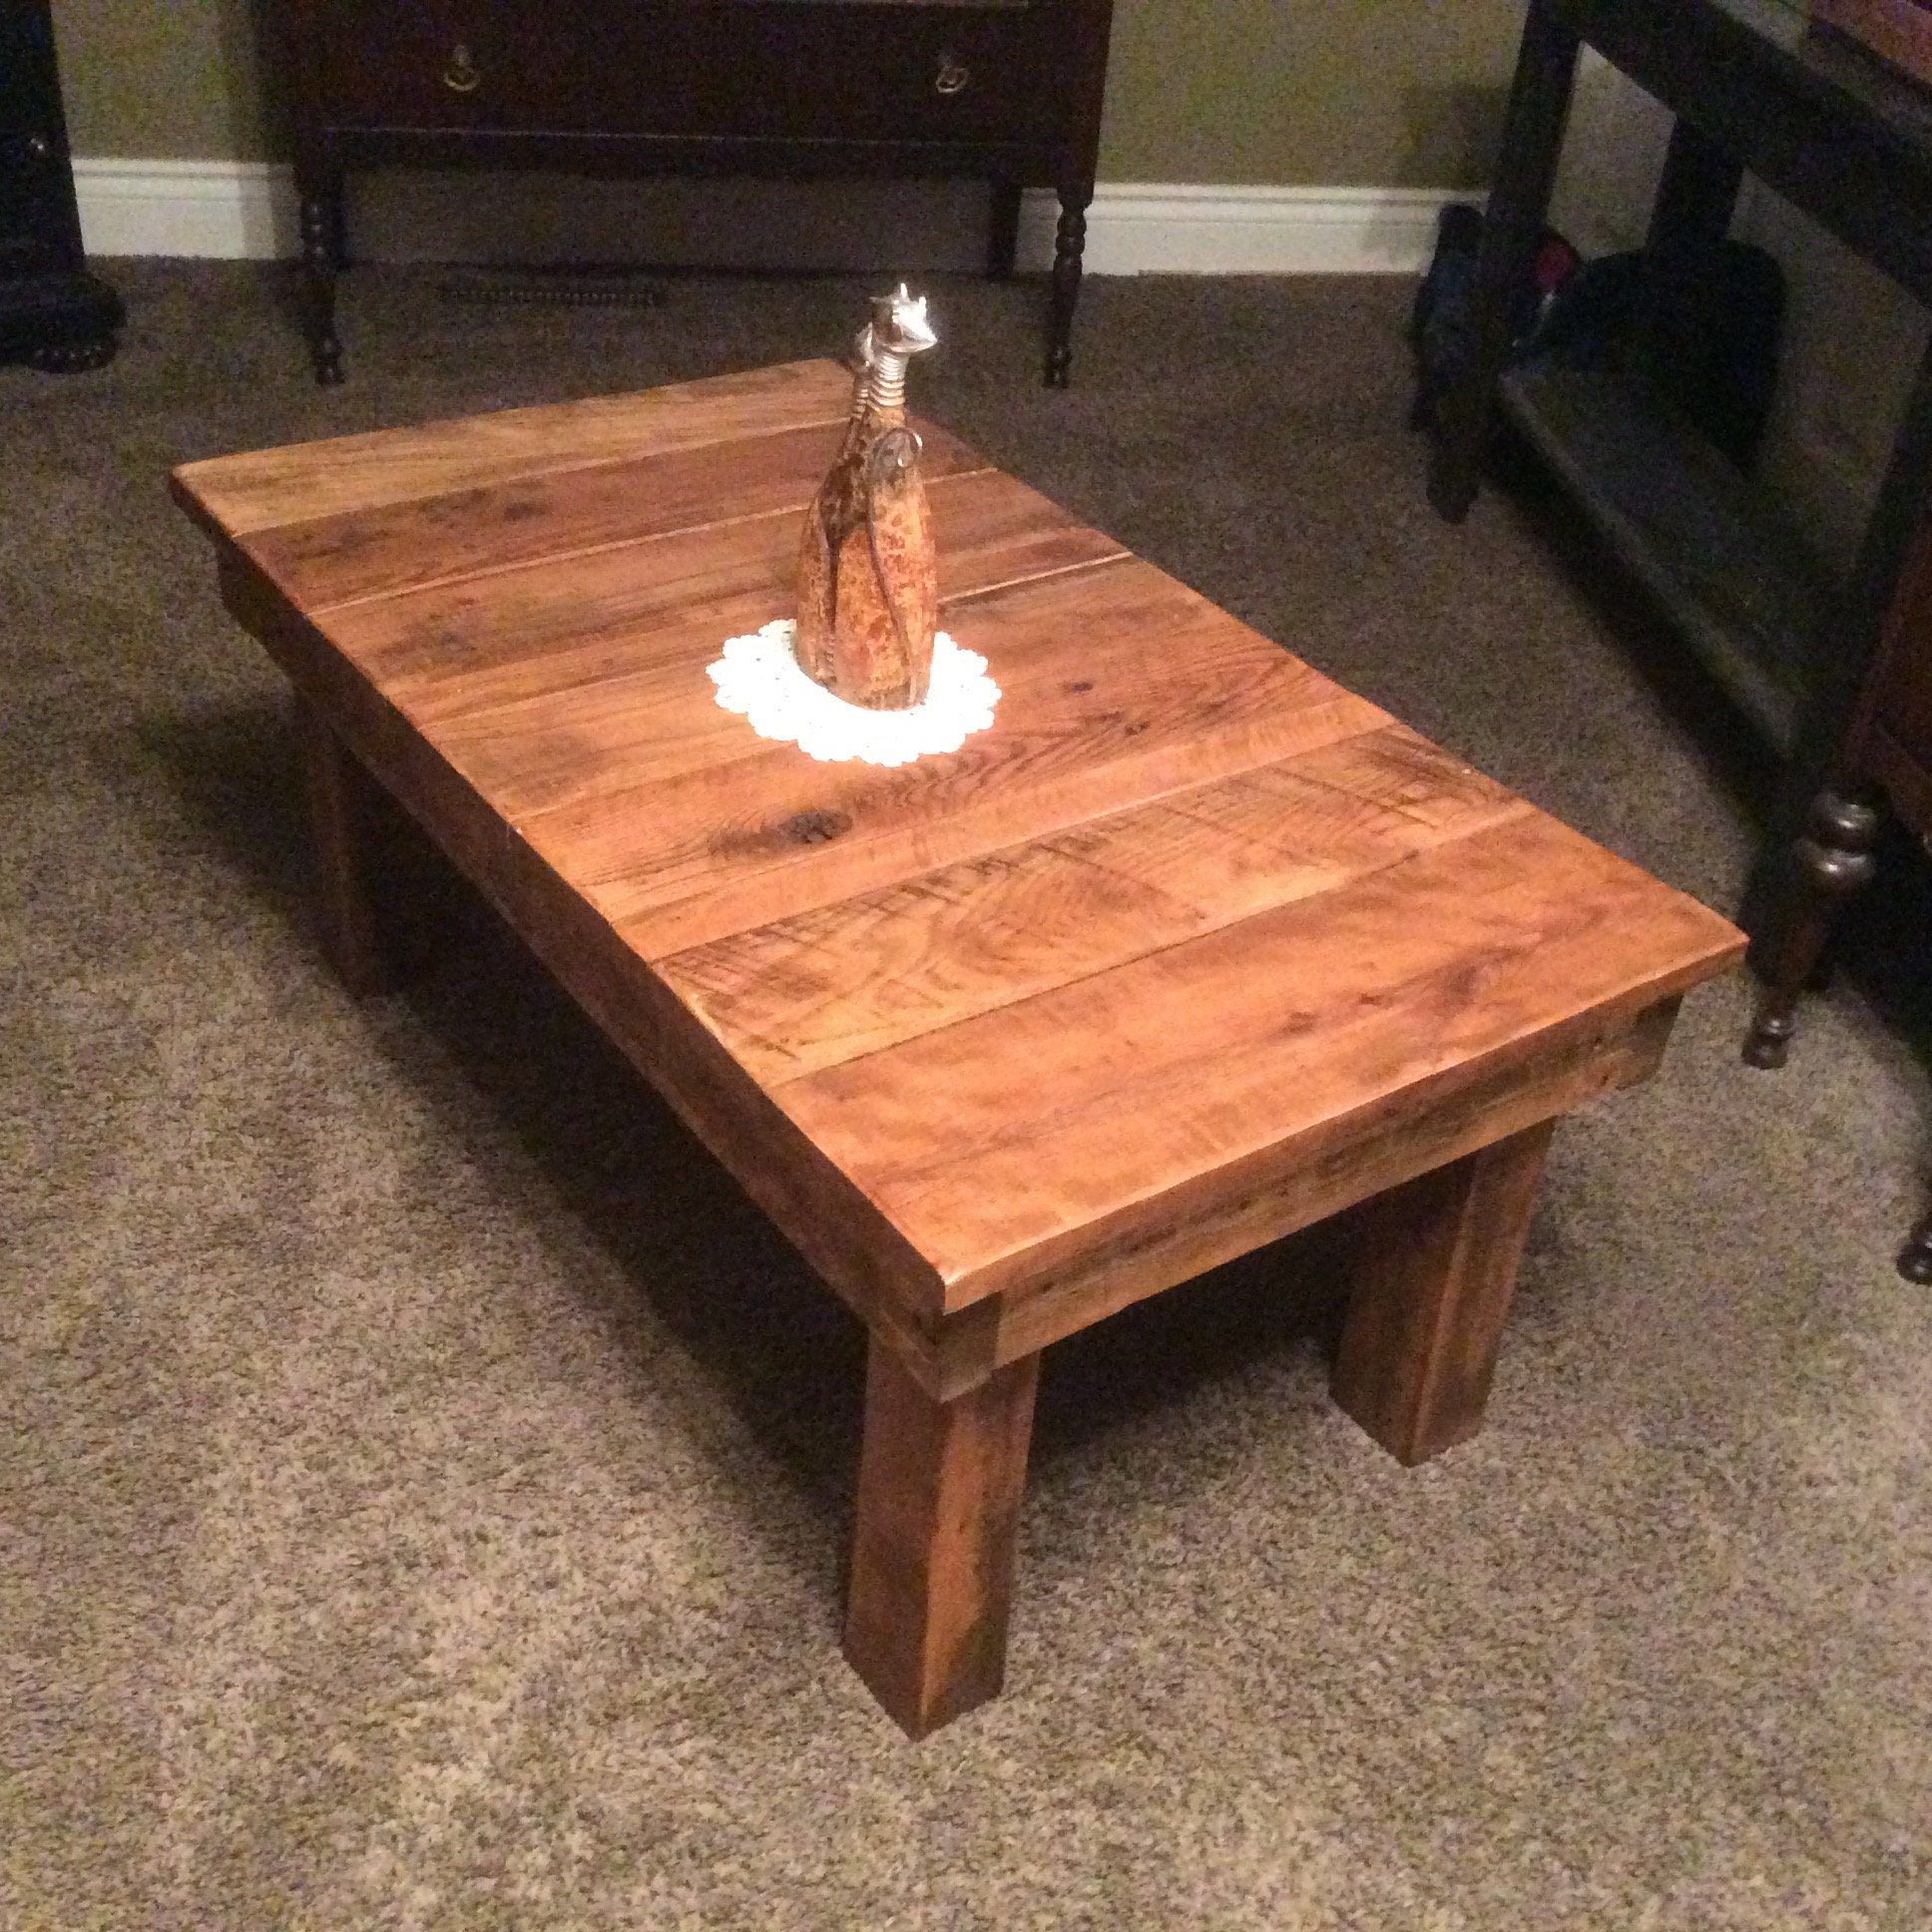 Reclaimed Wood Rustic Coffee Table Within Most Recent Barnwood Coffee Tables (Gallery 5 of 20)